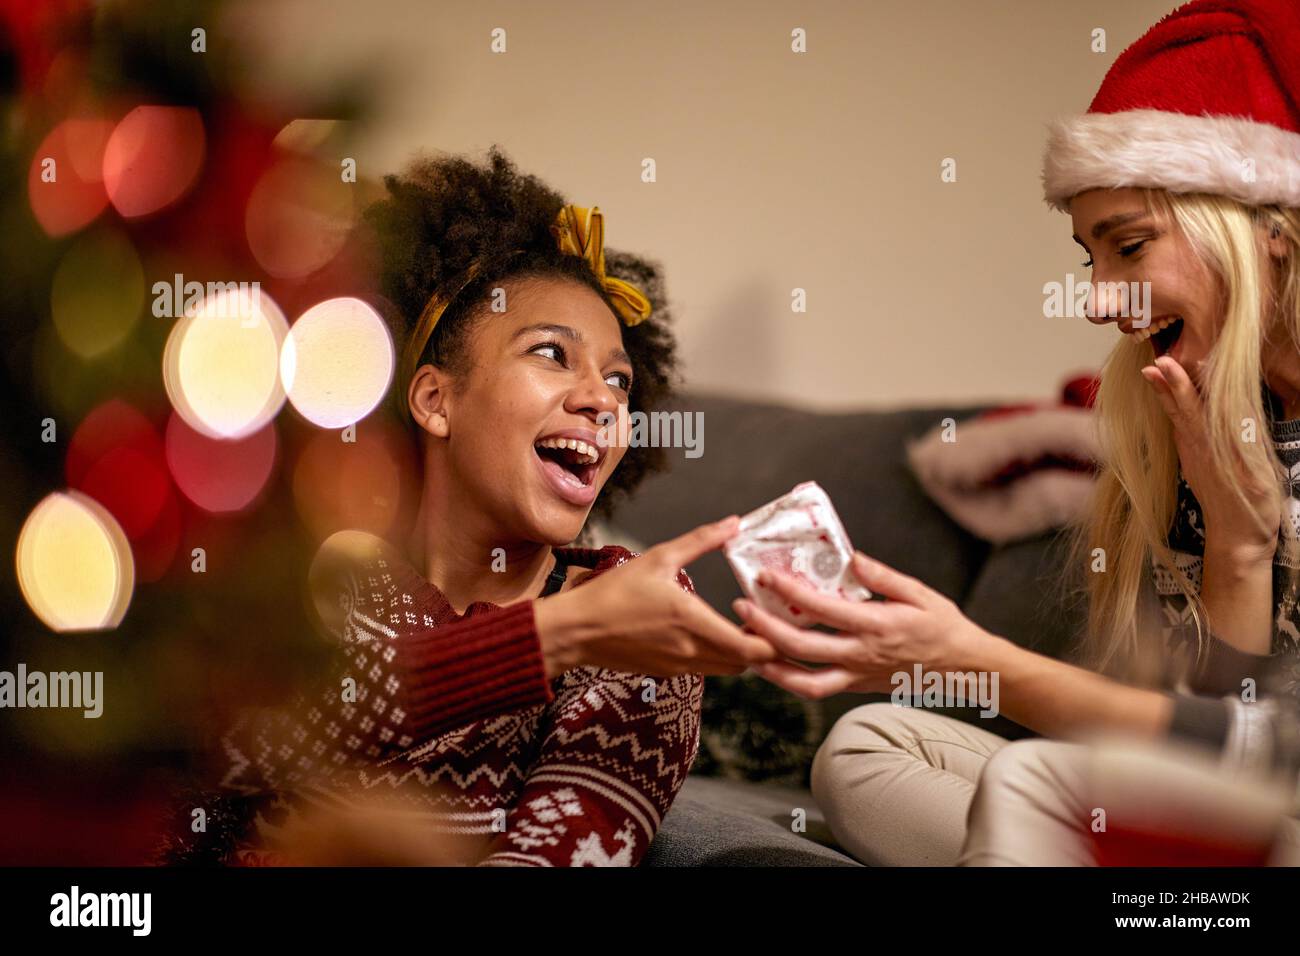 A girl is giving a present to her female friend at New Year party in a festive atmospehre at home. Christmas, New Year, holiday, party Stock Photo